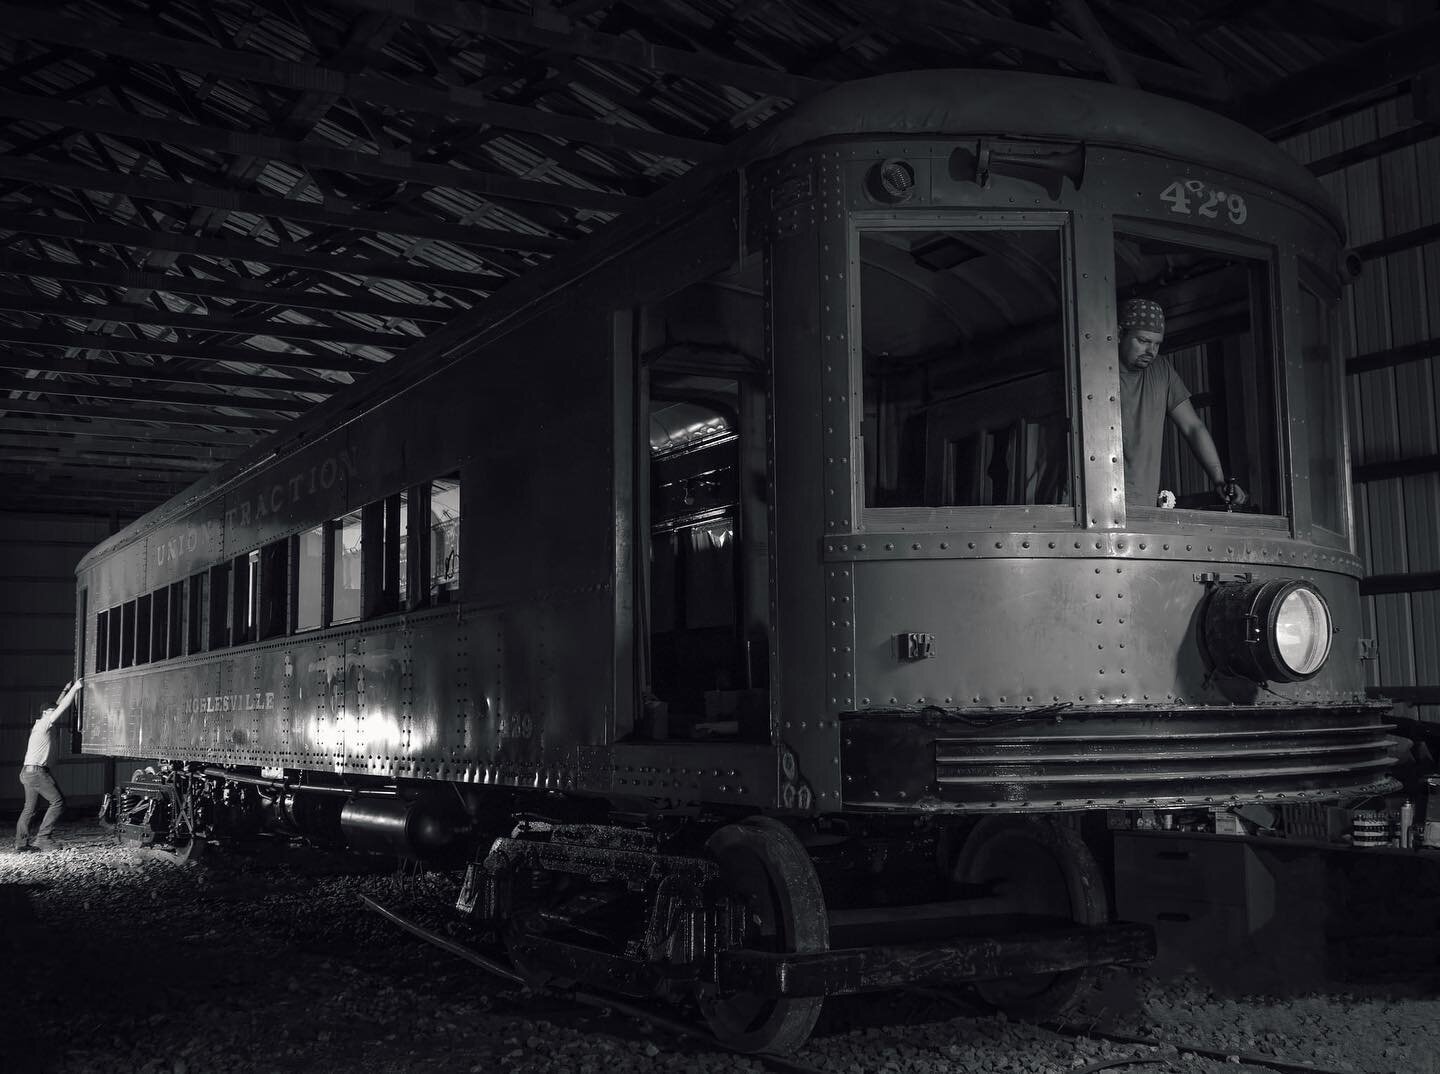 A century ago, Indiana's high-speed interurban electric trains empowered Hoosiers to pursue an education, expand economic opportunity, visit loved ones, quickly ship perishable goods - and, electrify rural communities. After a full mechanical rebuild